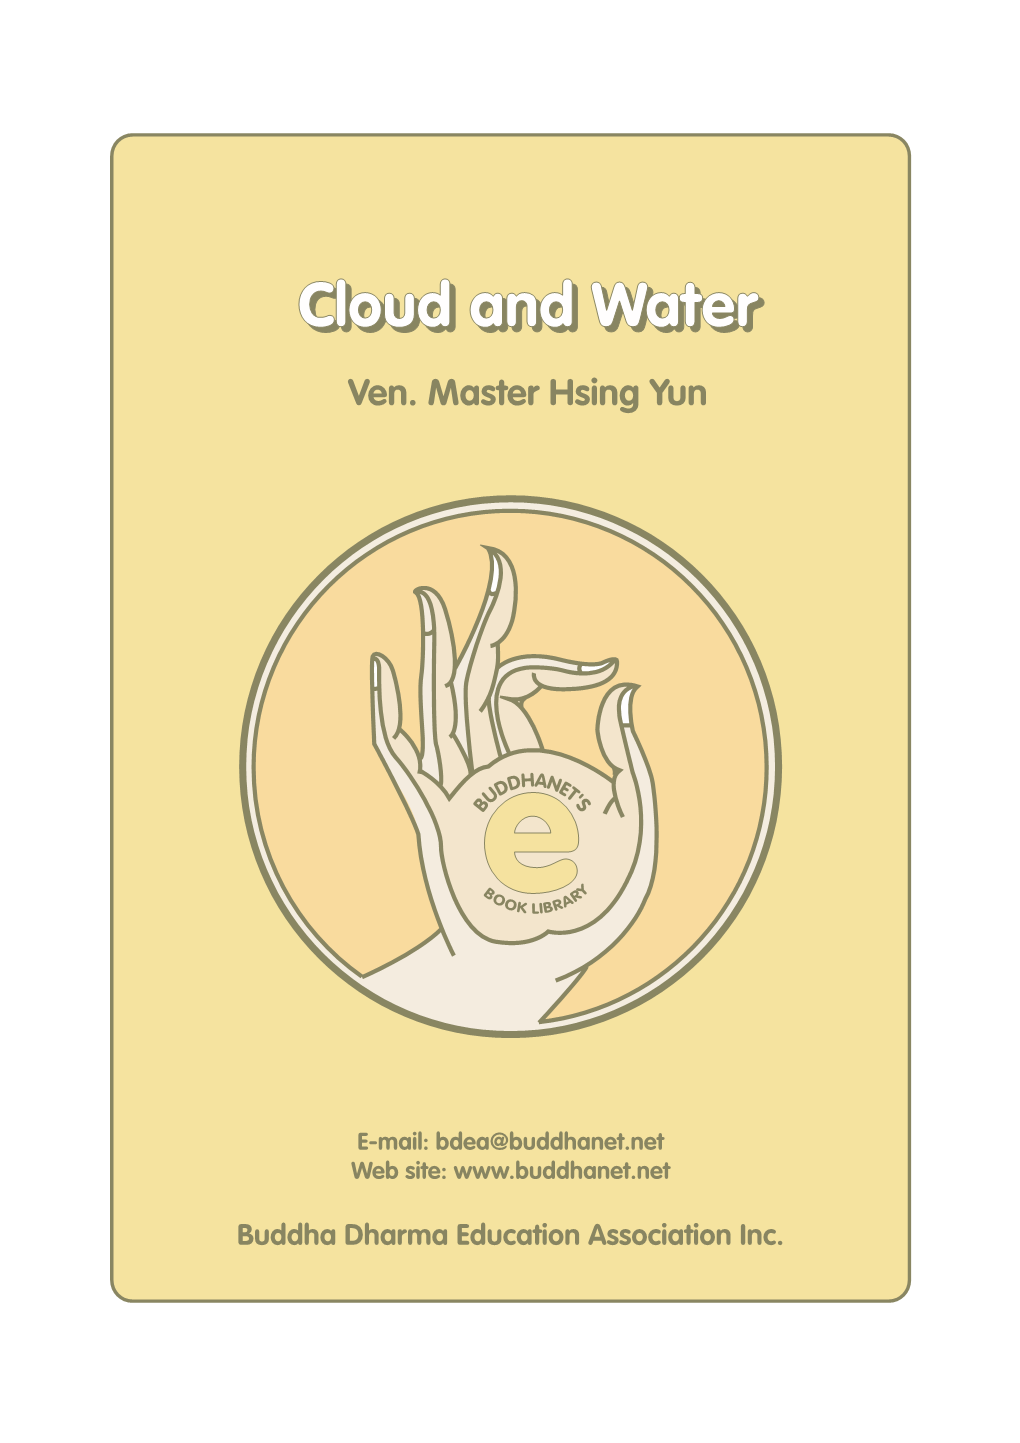 Cloud and Water, by Ven. Master Hsing